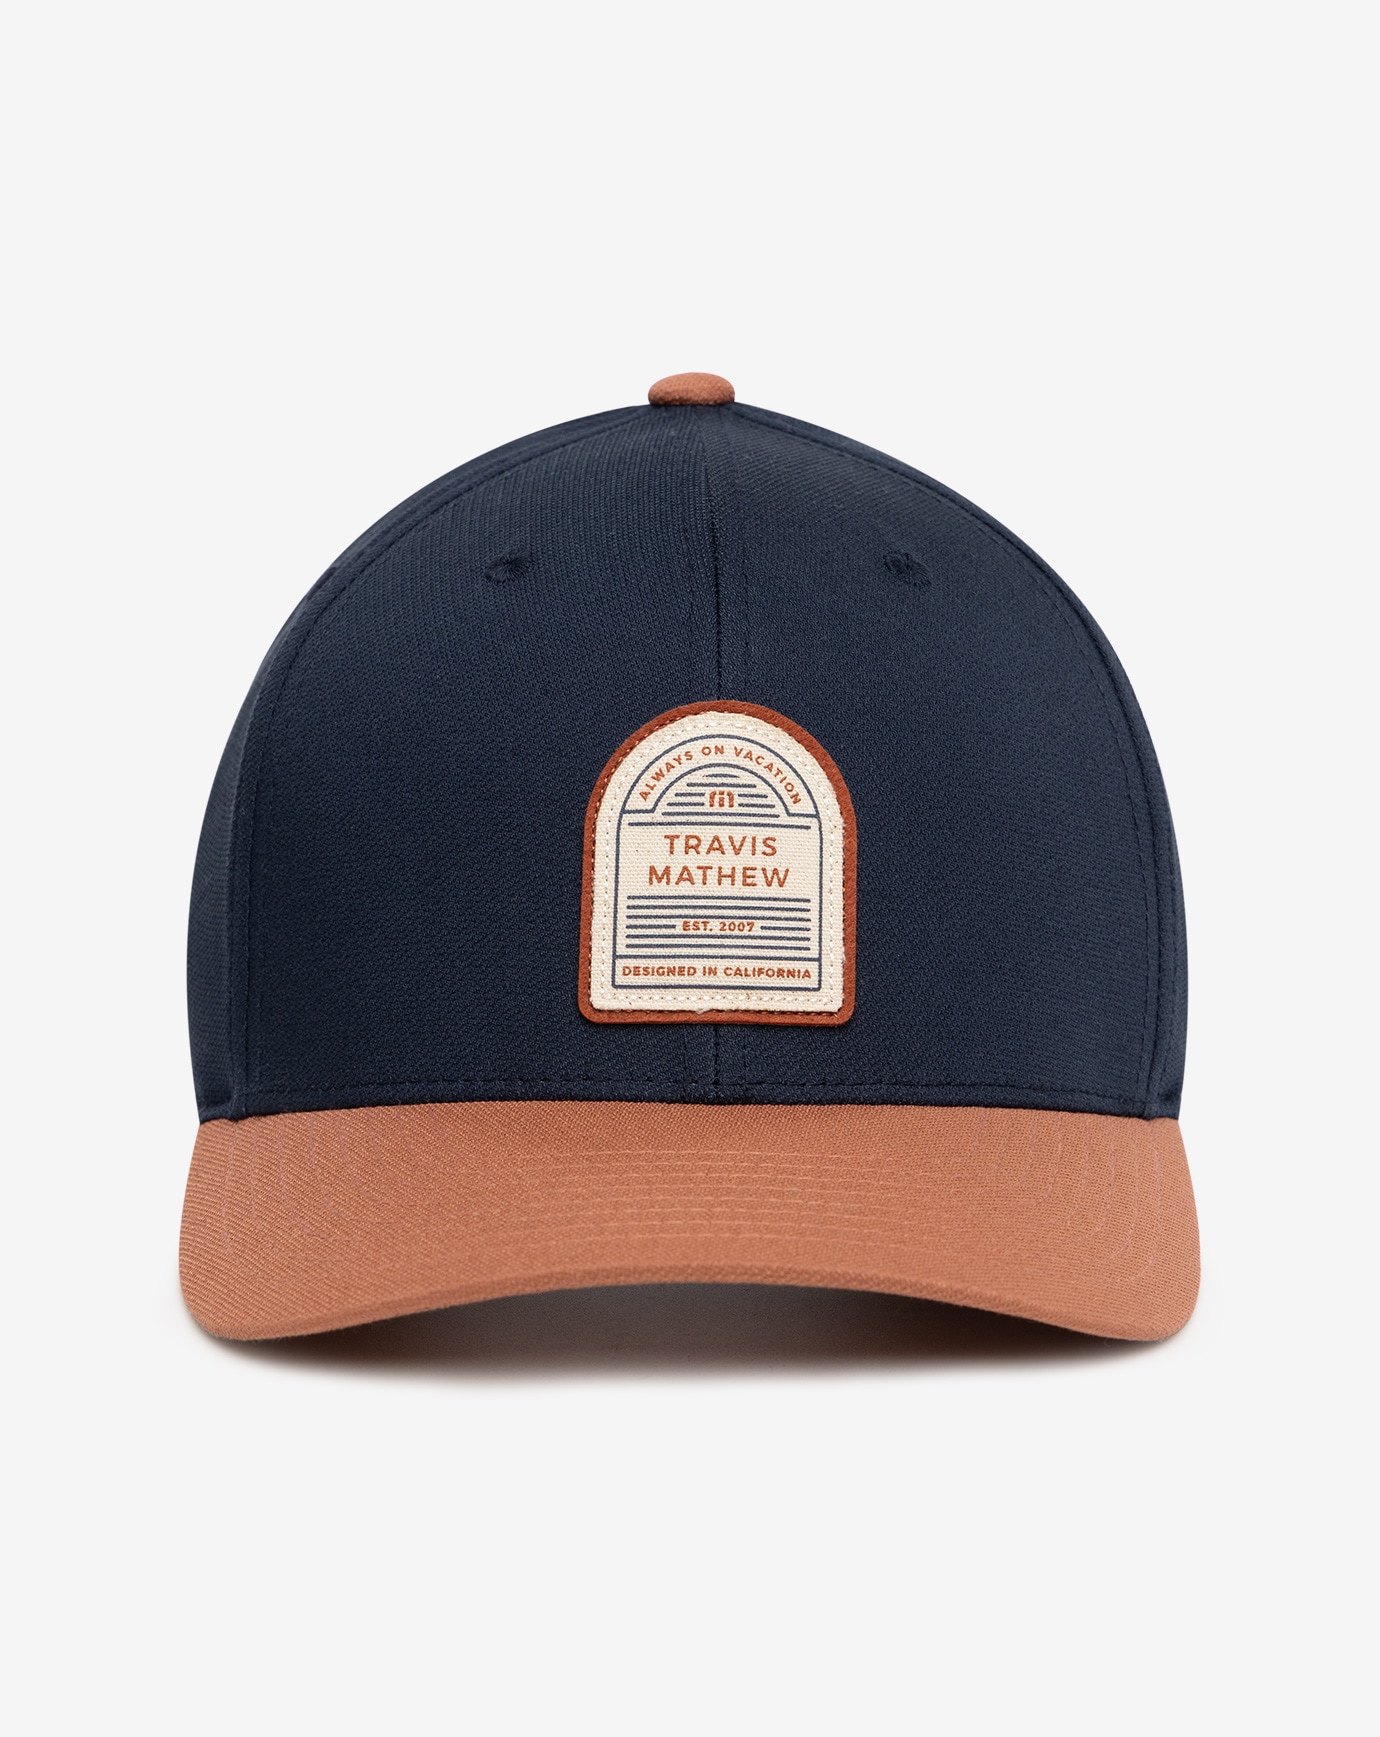 Related Product - INSTANT CONNECTION YOUTH HAT